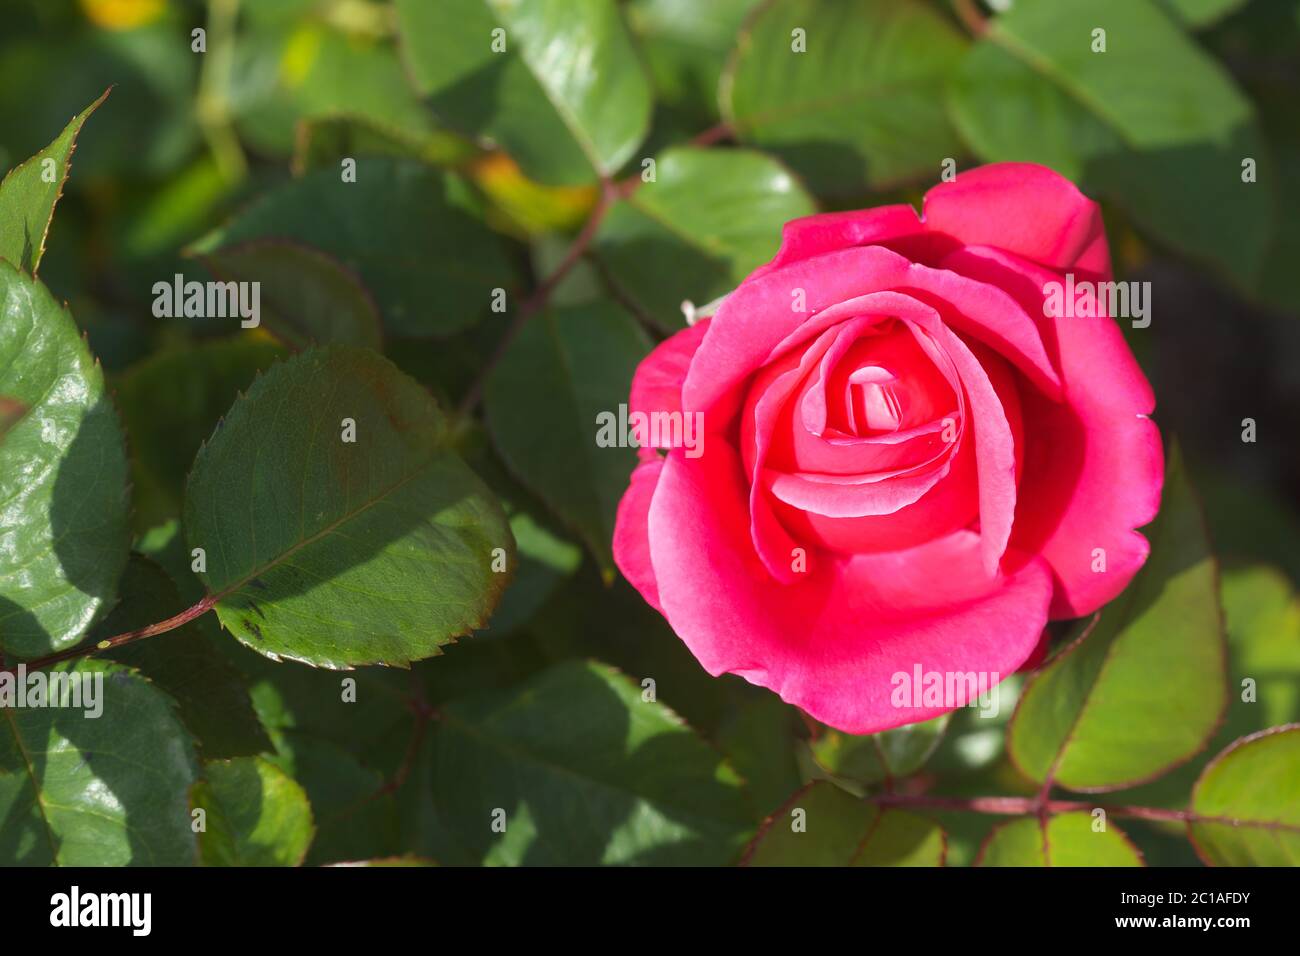 Rose Charisma red rose flower Stock Photo